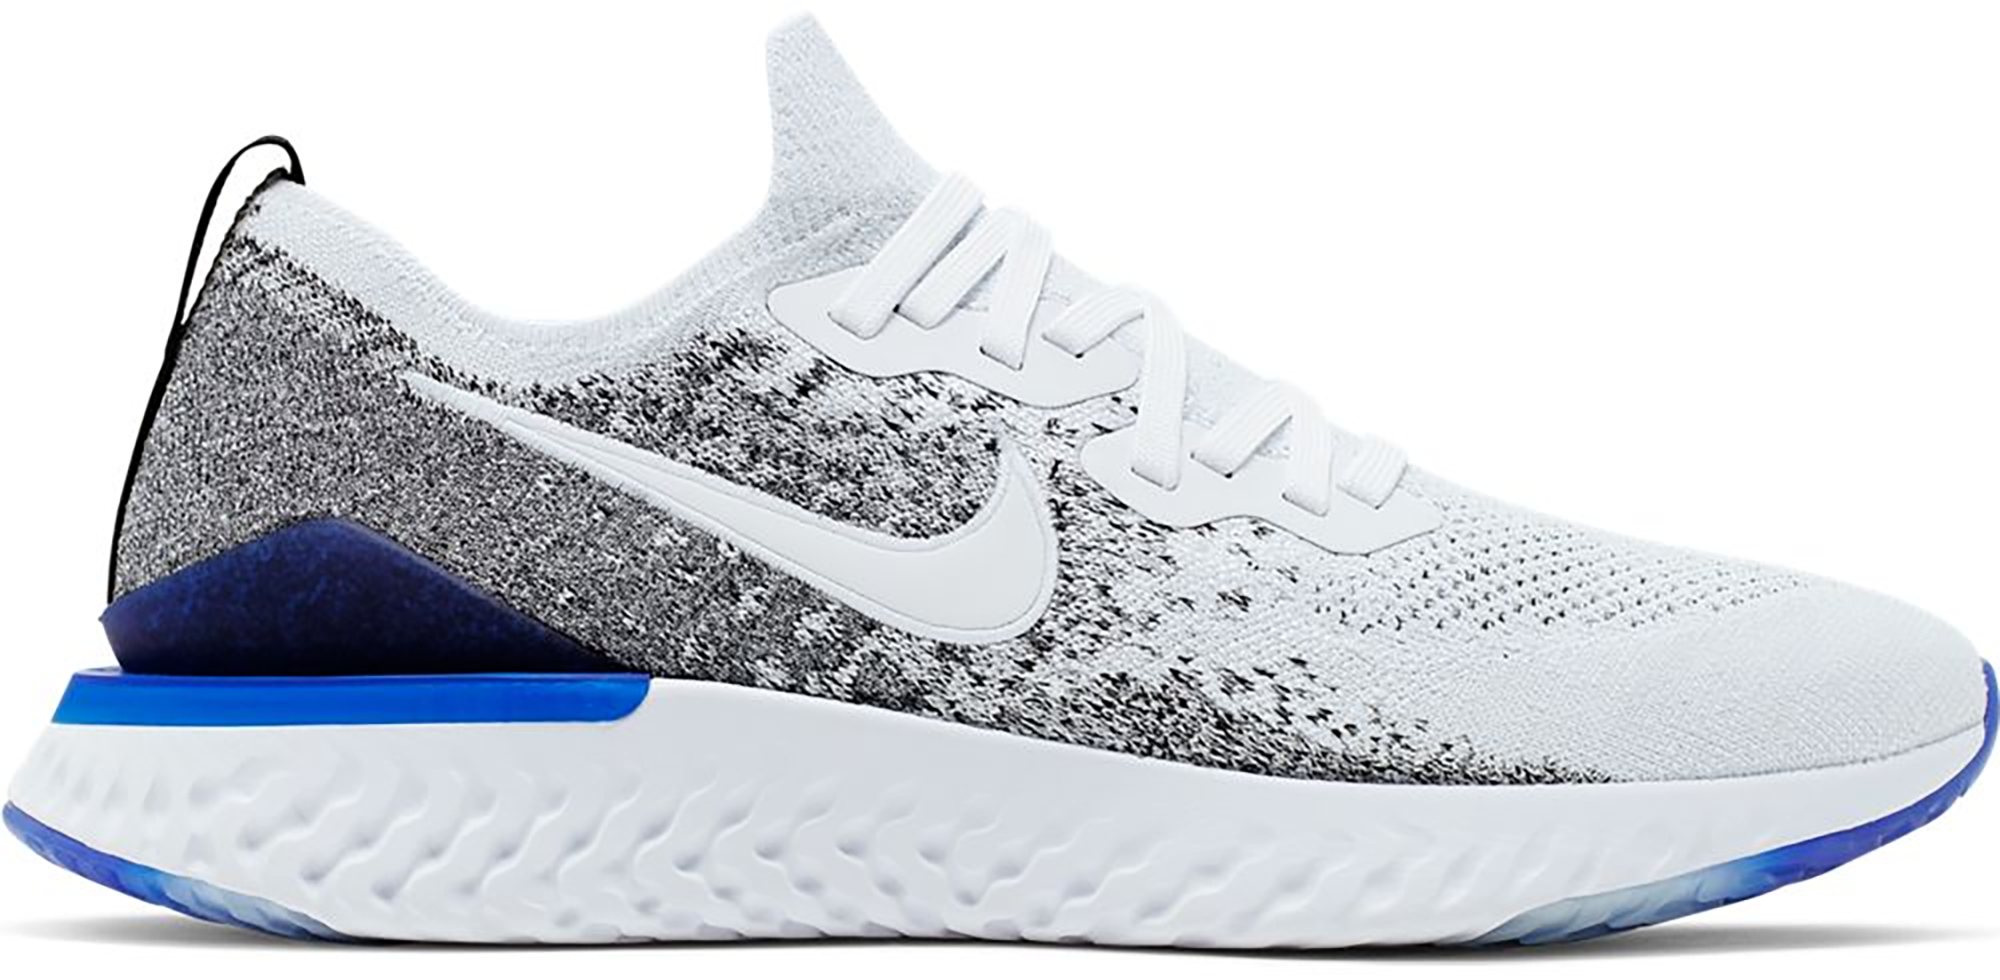 nike react flyknit 2 black and white